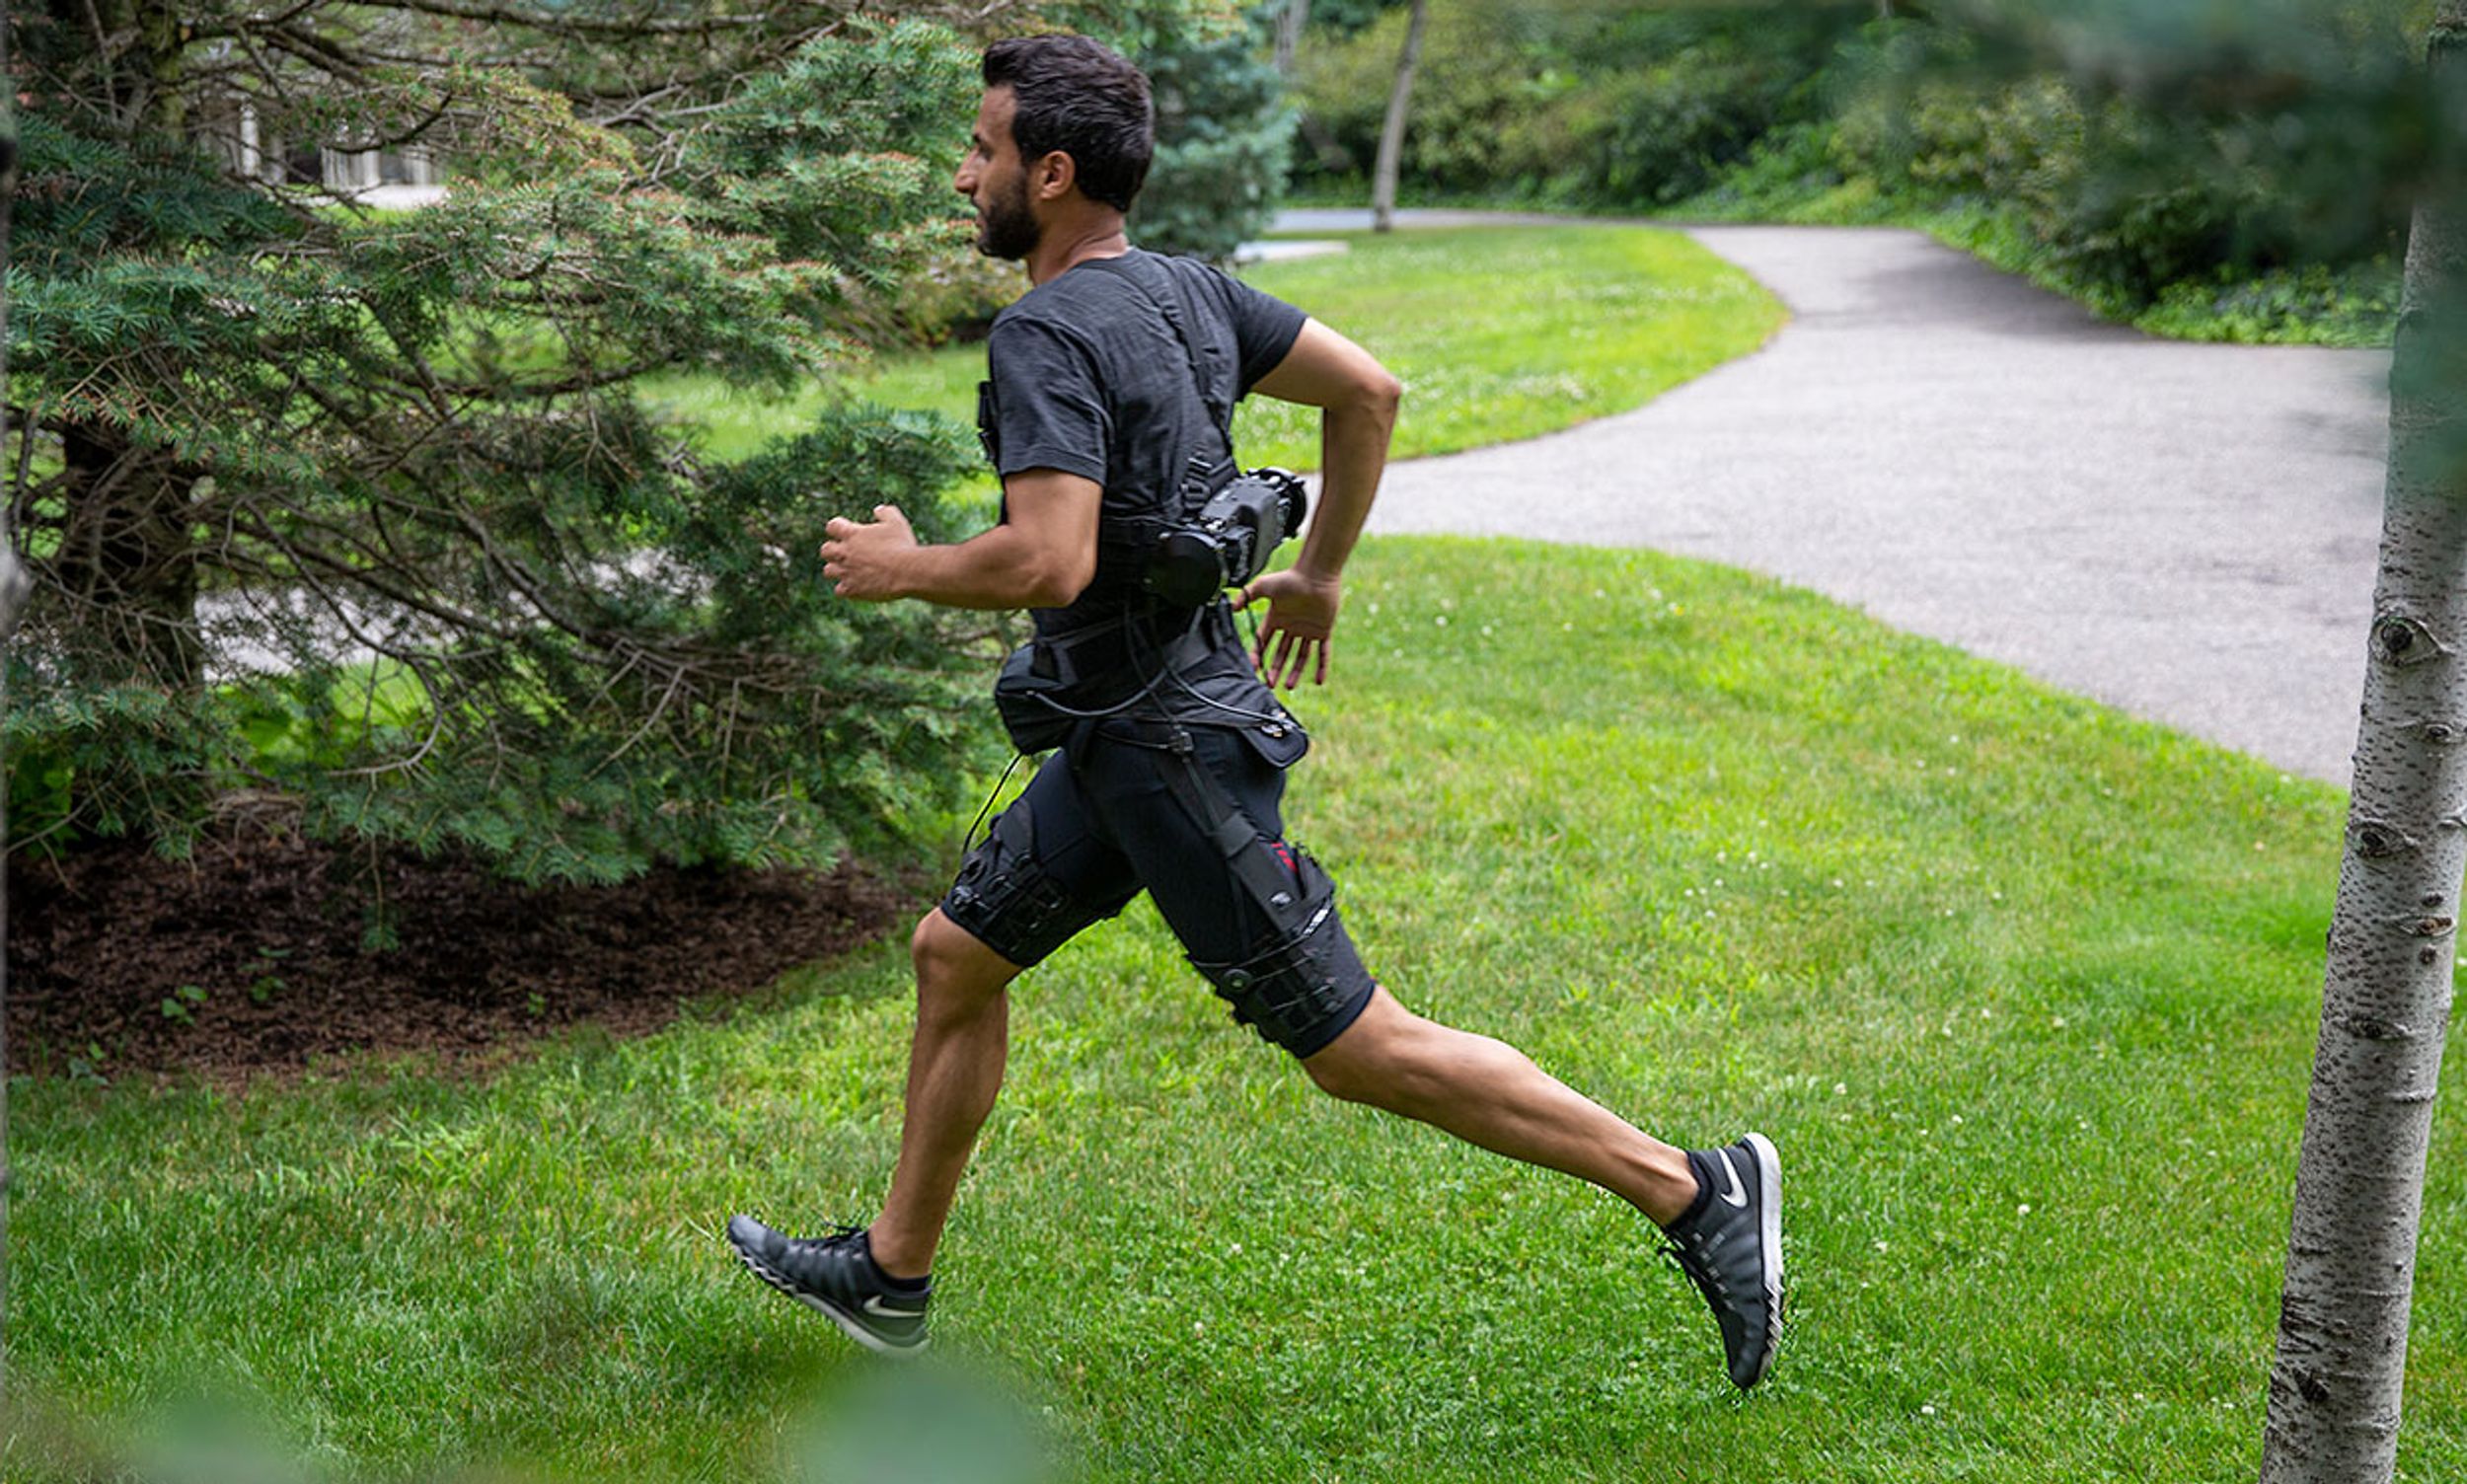 The portable exosuit is made of textile components worn at the waist and thighs, and a mobile actuation system attached to the lower back which uses an algorithm that robustly predicts transitions between walking and running gaits.